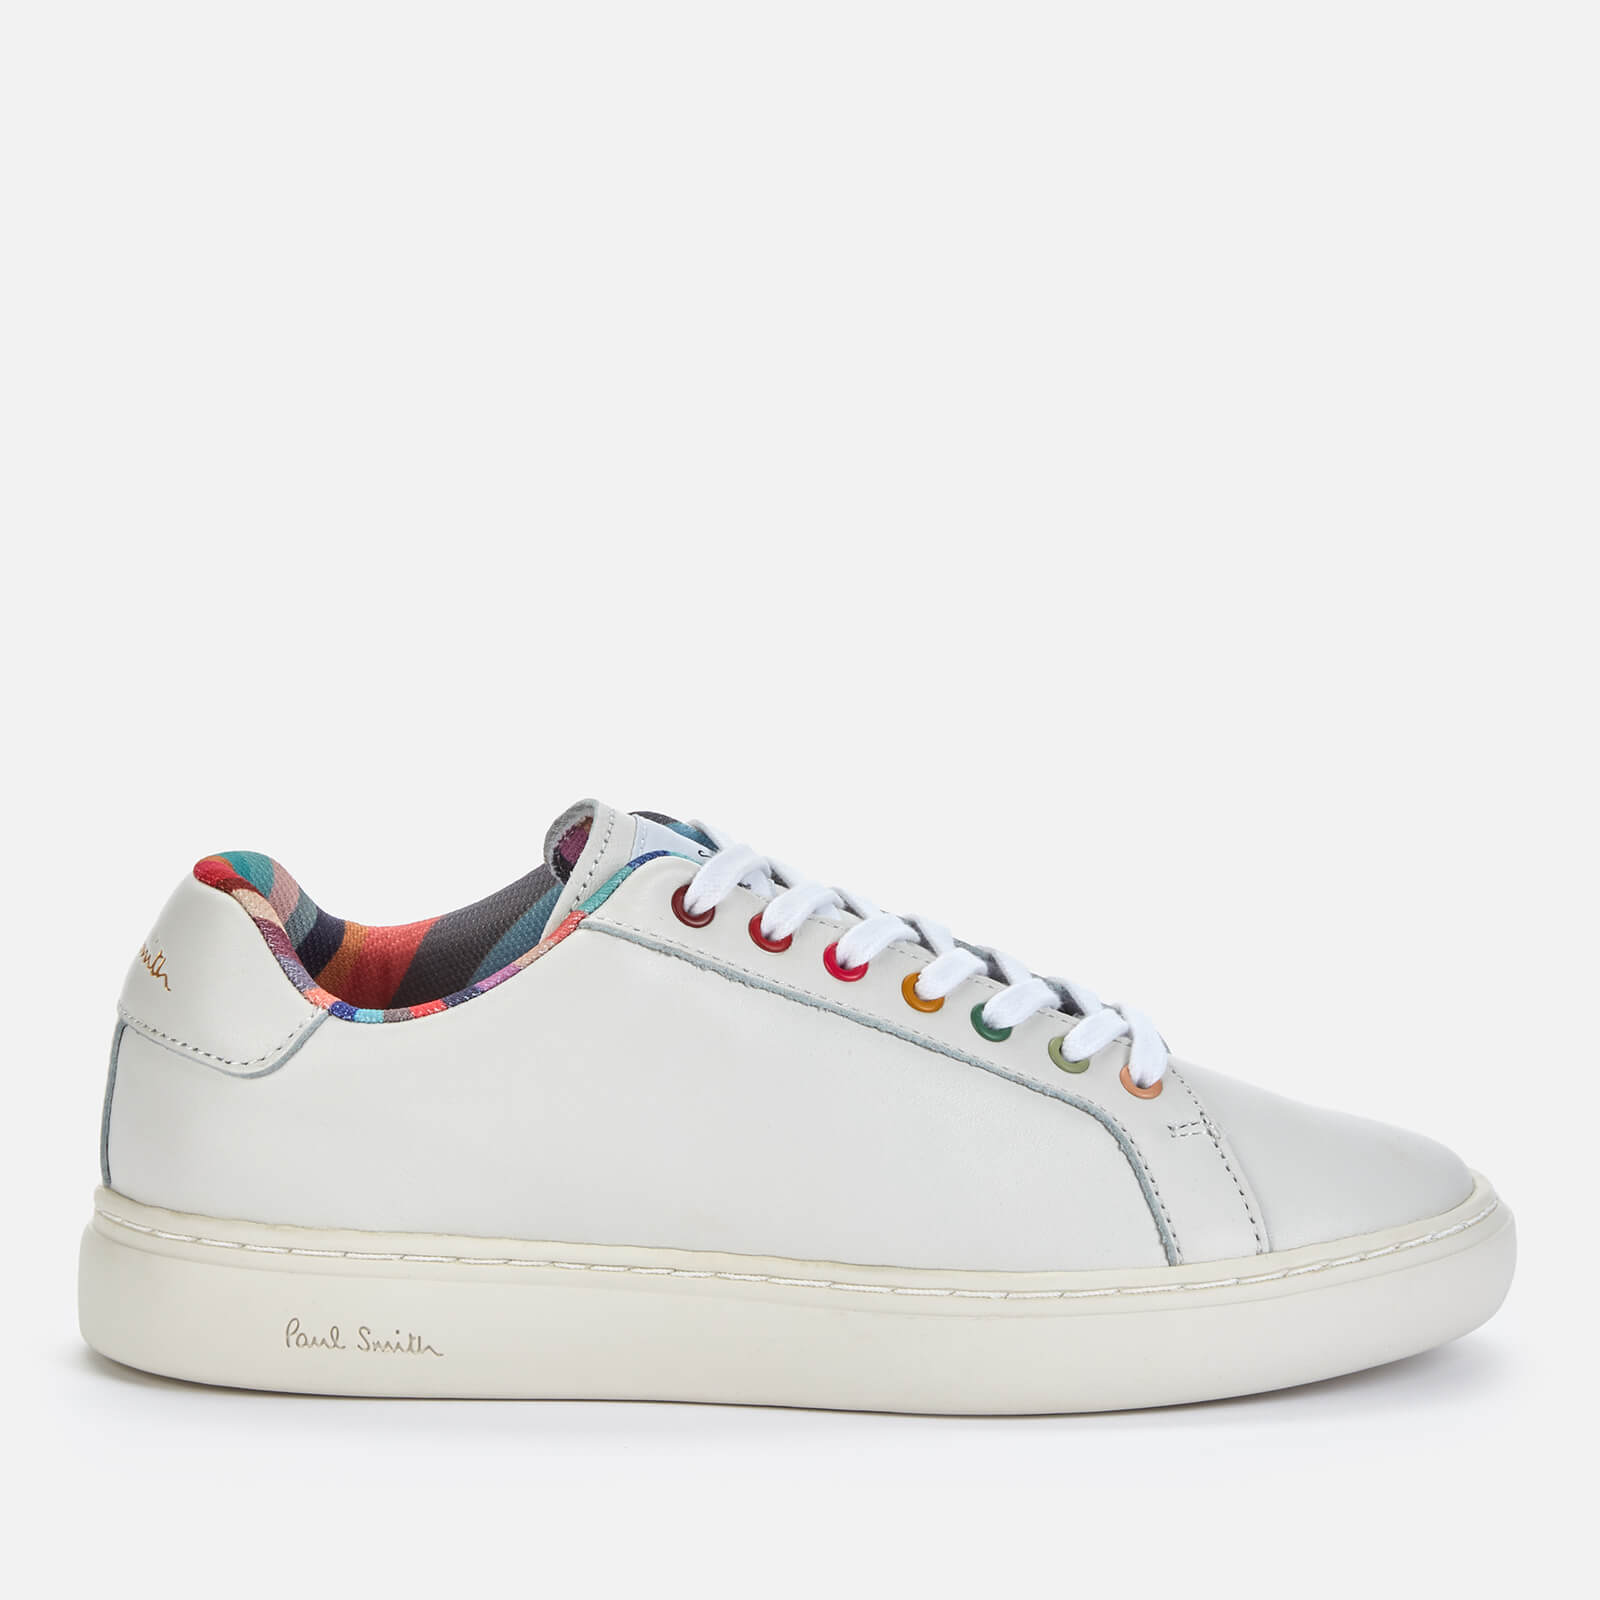 Paul Smith Women's Lapin Leather Low Top Trainers - White - UK 8